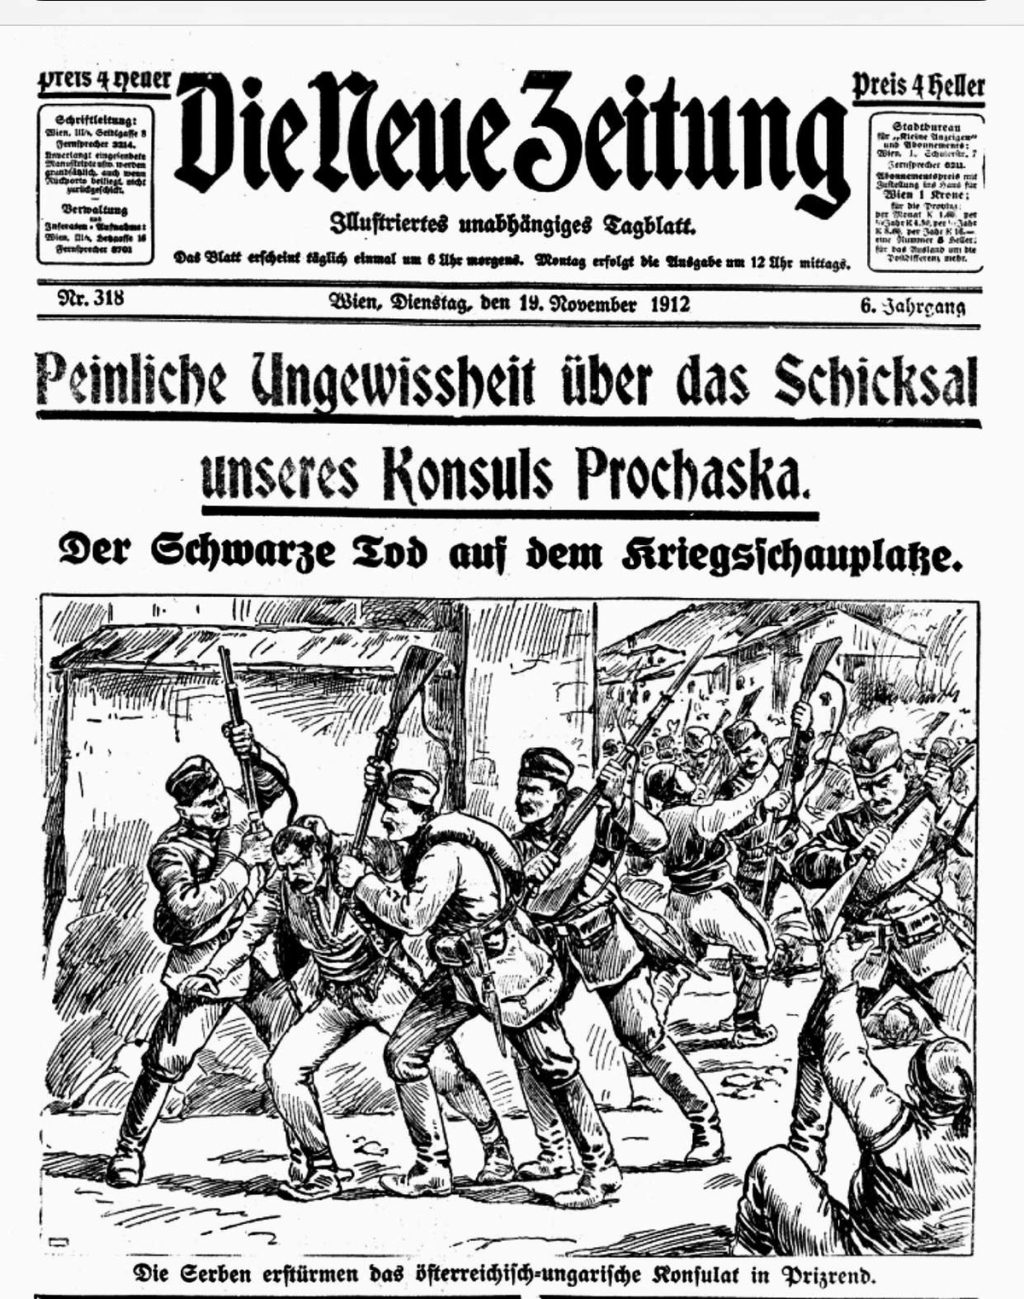 Newspaper drawing: Serbian troops storm the Austro-Hungarian consul in Prizren.